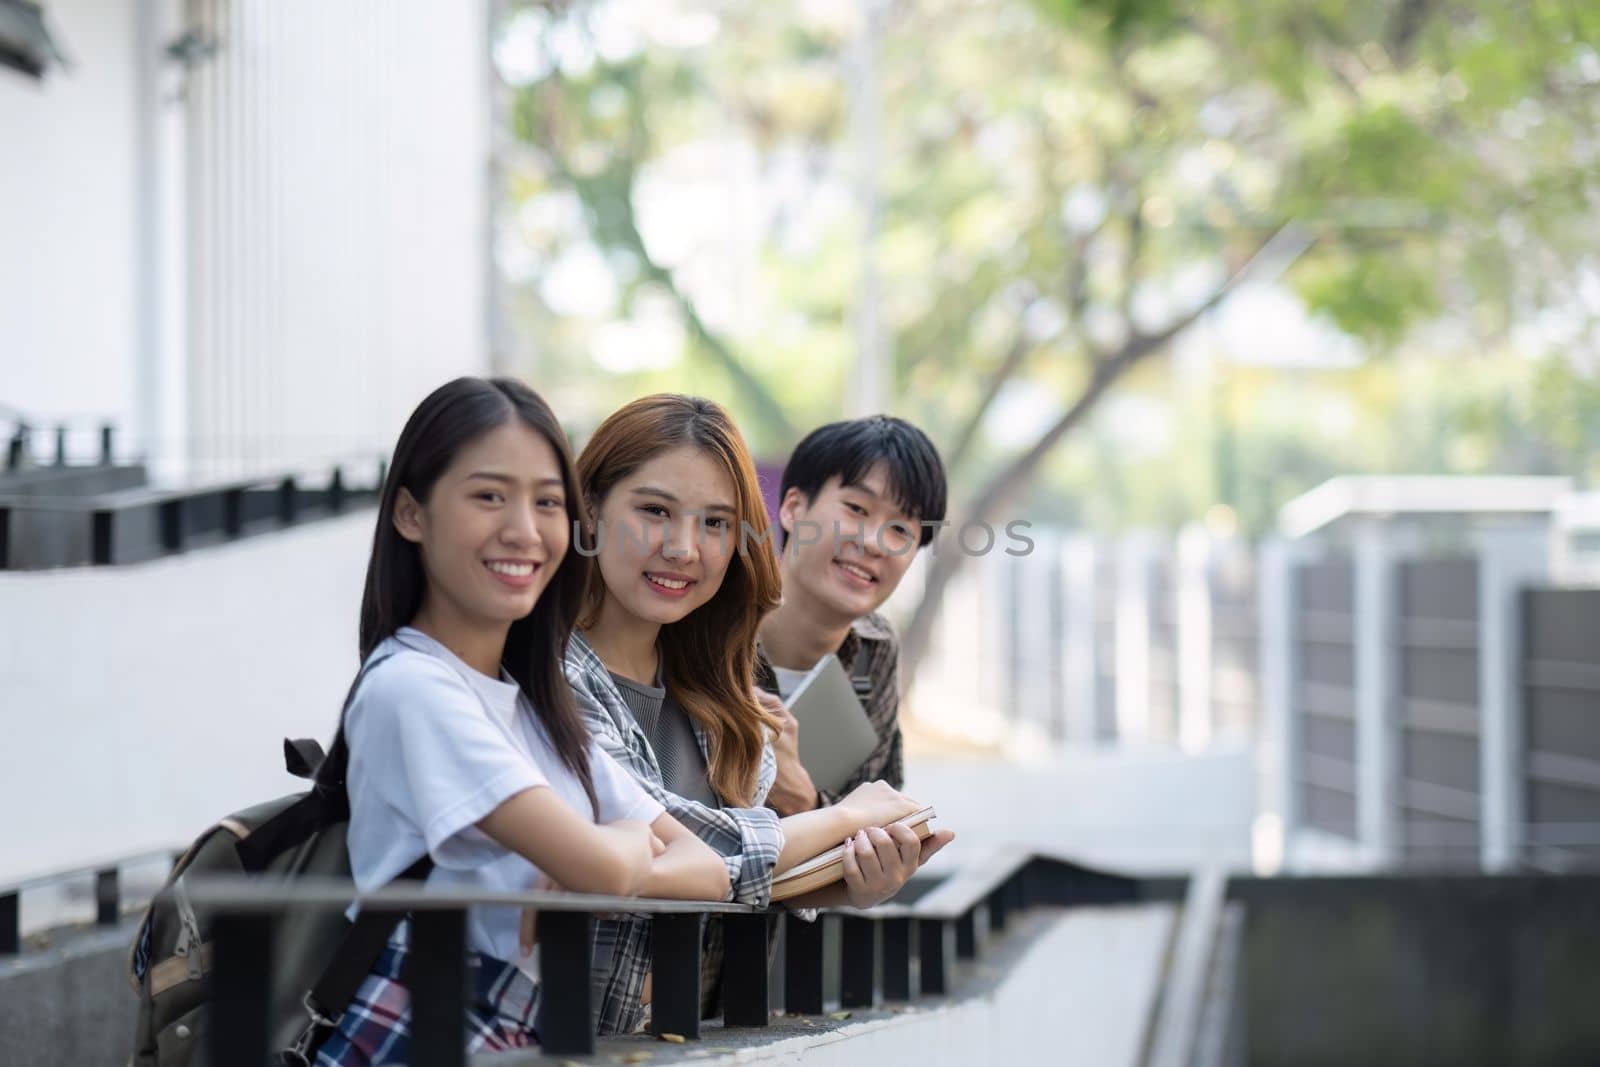 Group of young Asian college students sitting on in front of the school building, talking and focusing on their school project.